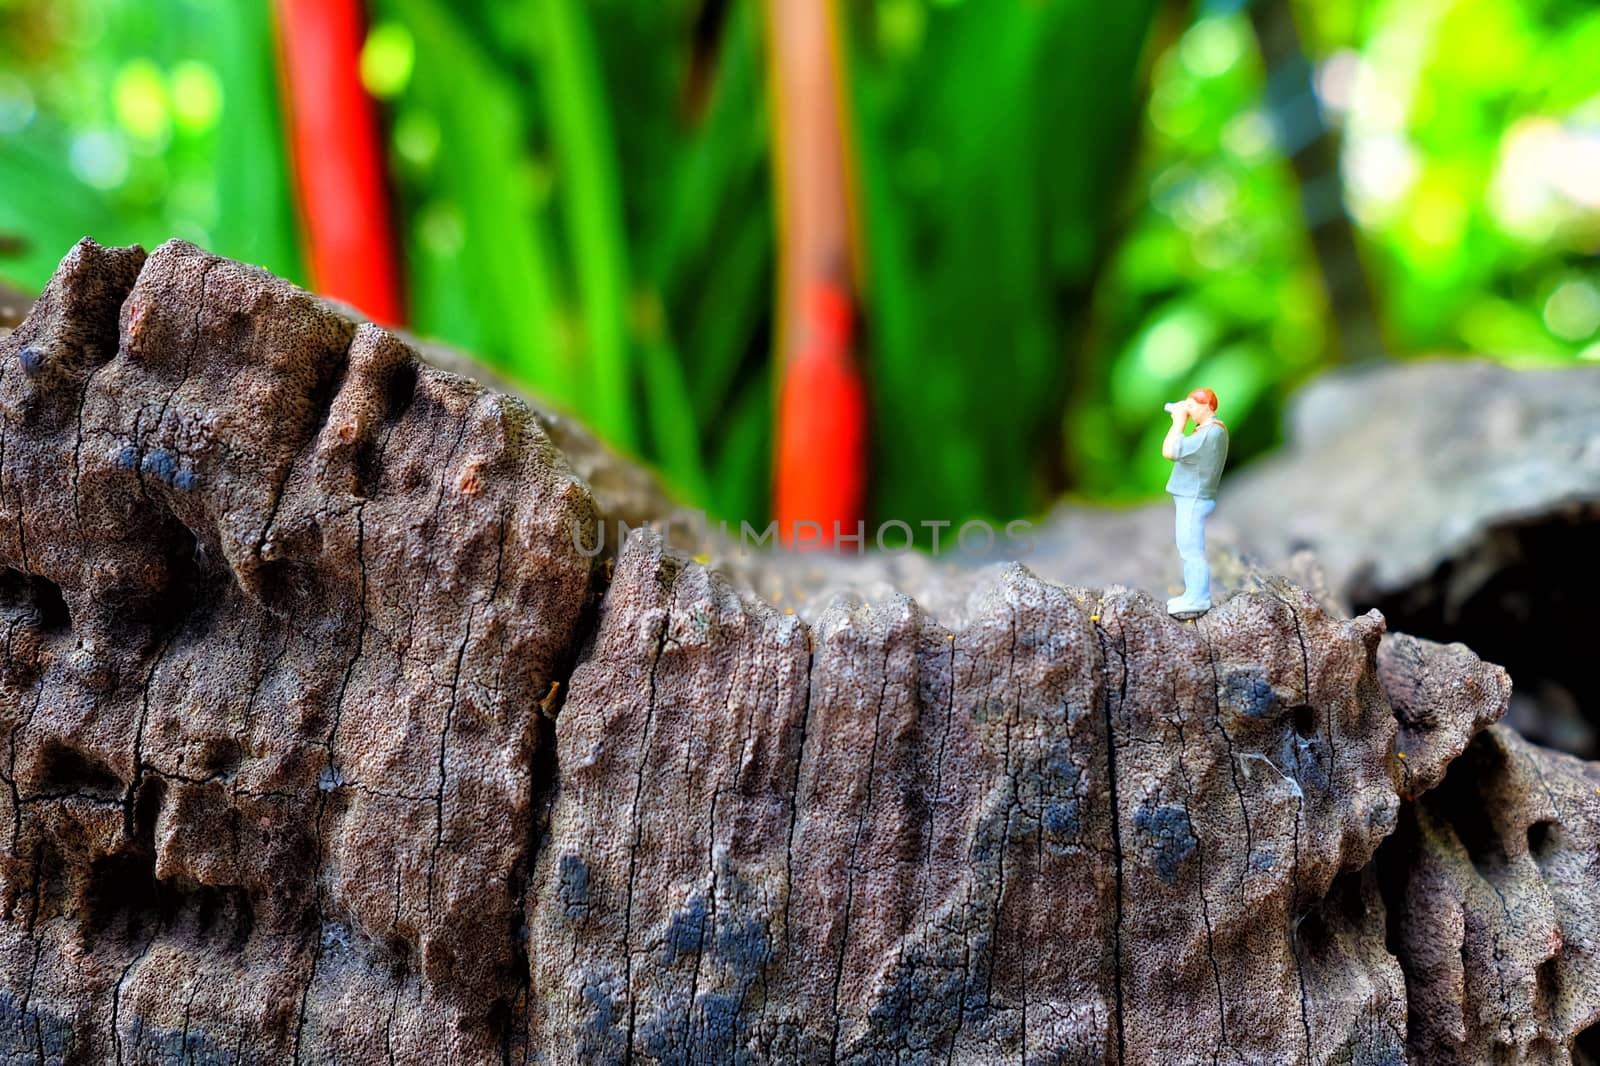 Miniature Figure Photographer with Green Park Background. by mesamong